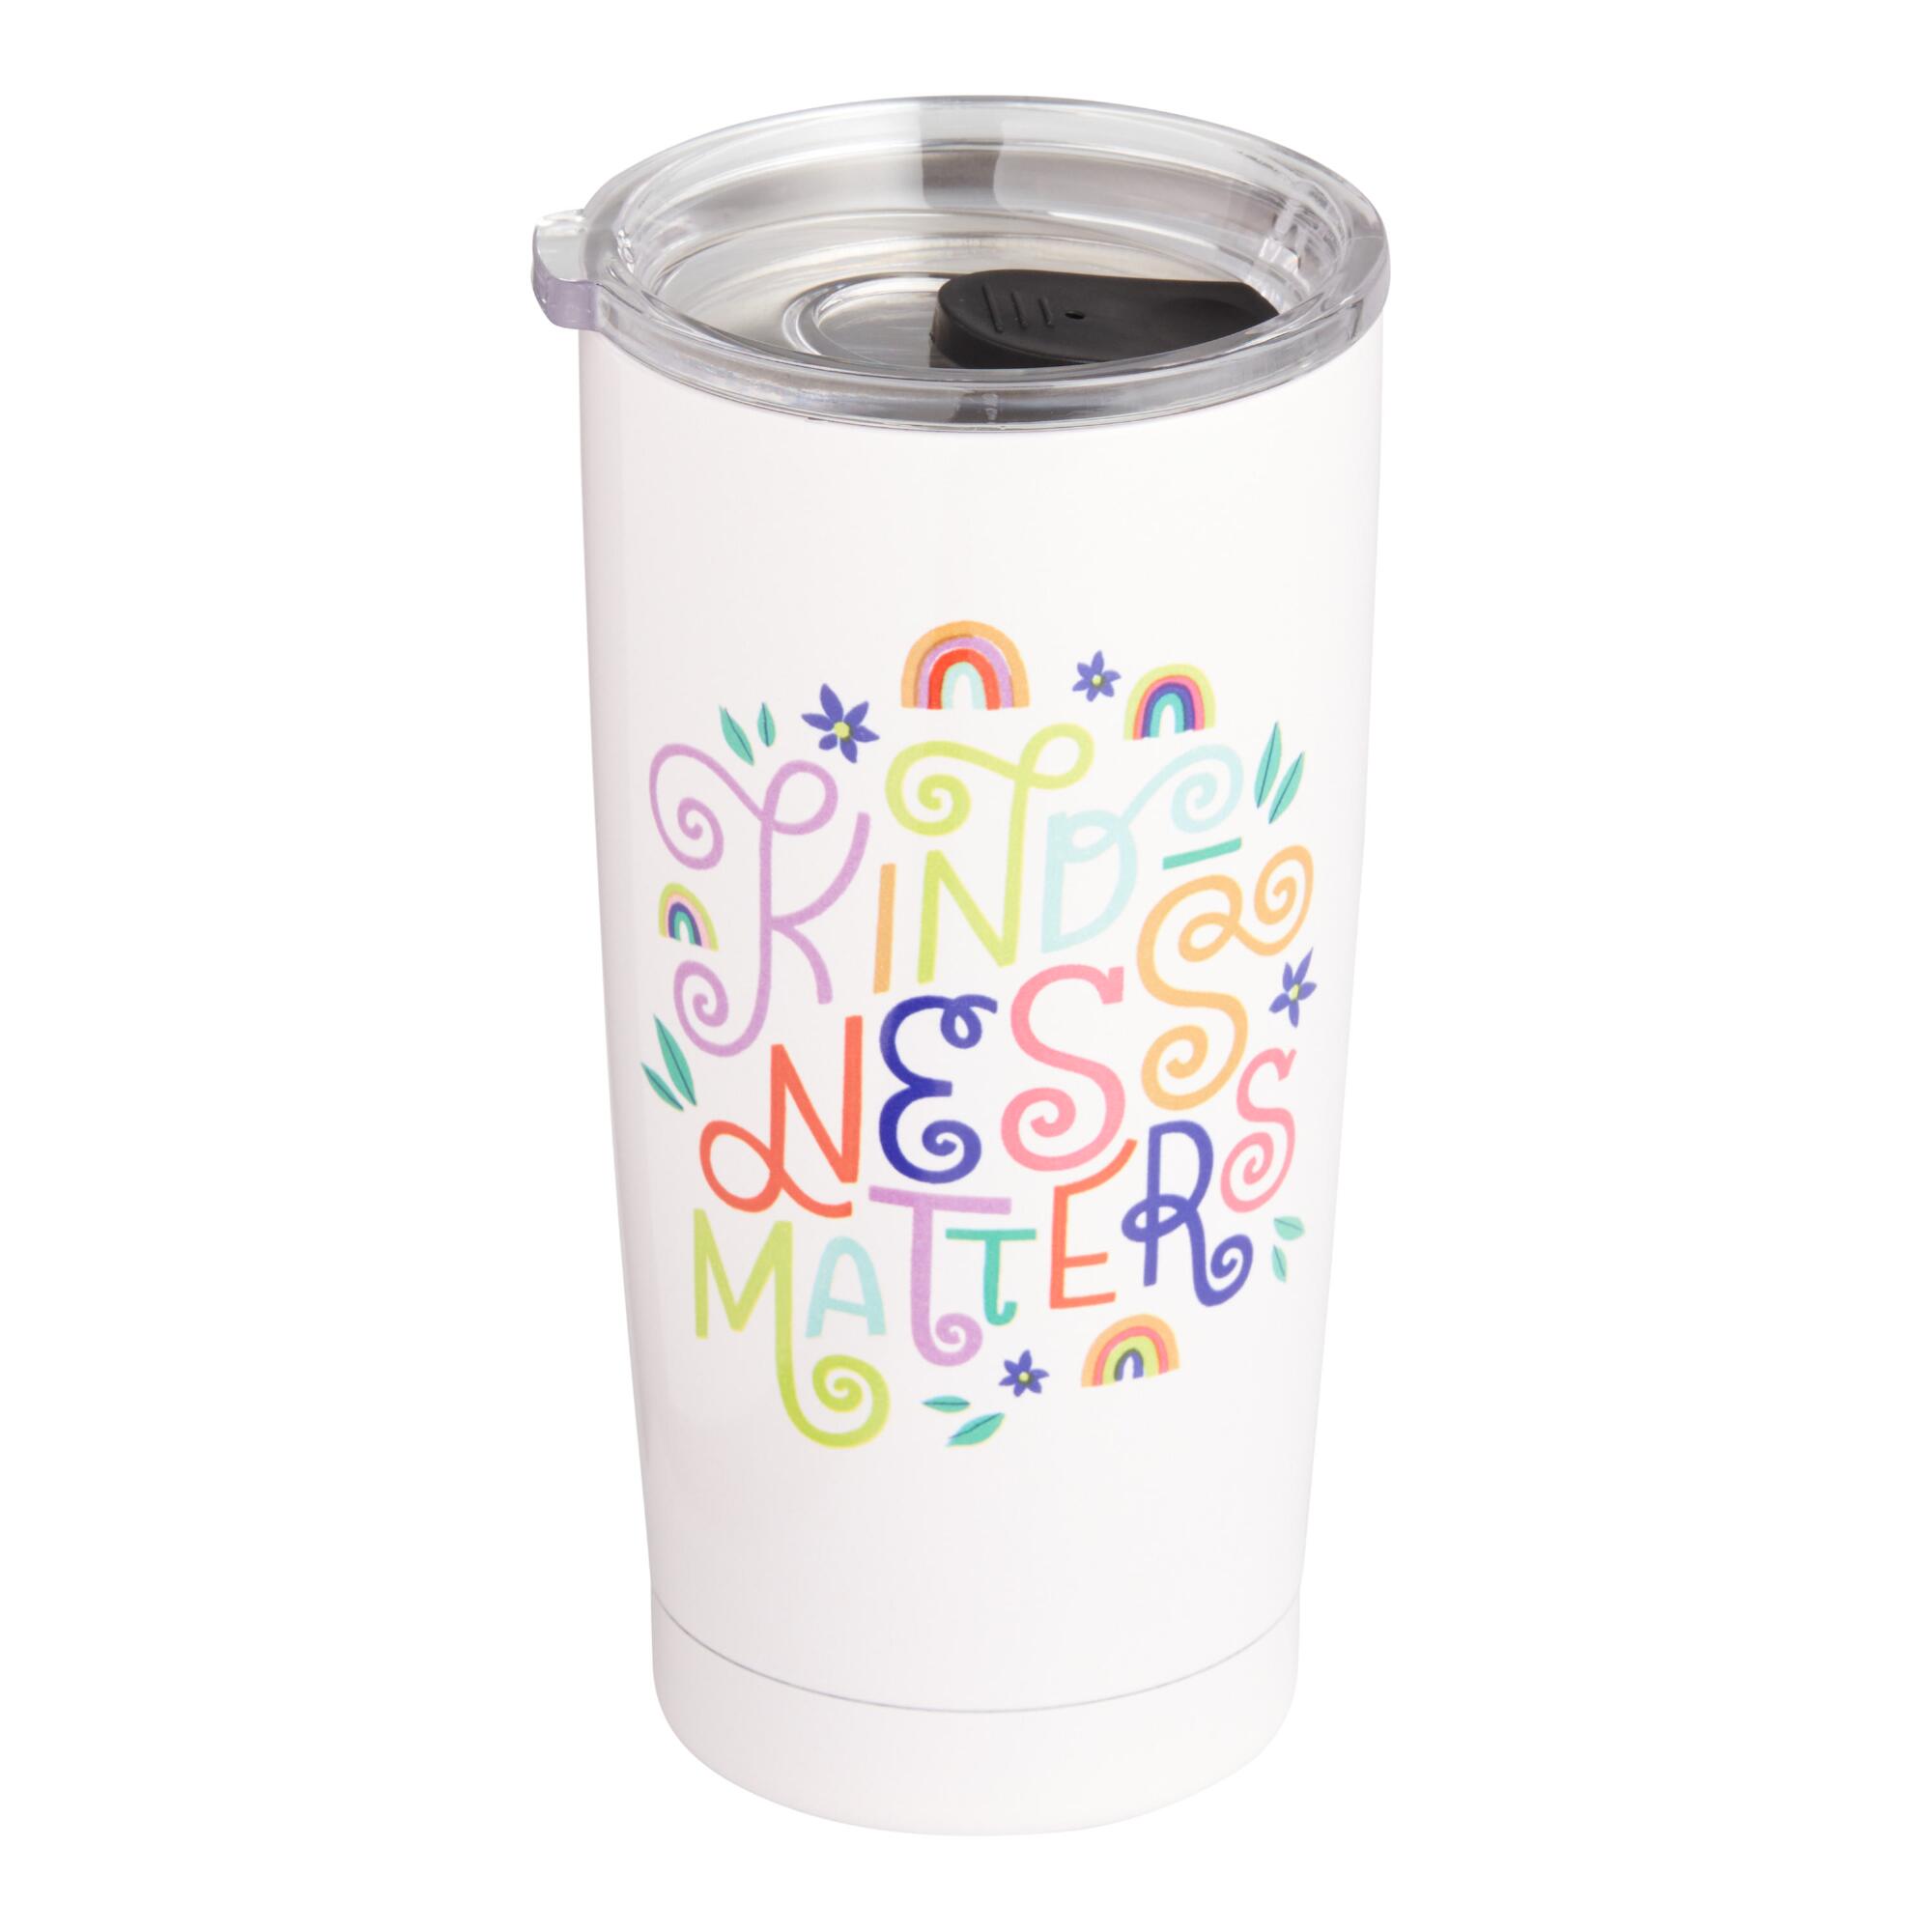 Studio Oh Kindness Matters Insulated Stainless Steel Tumbler: Pink by World Market